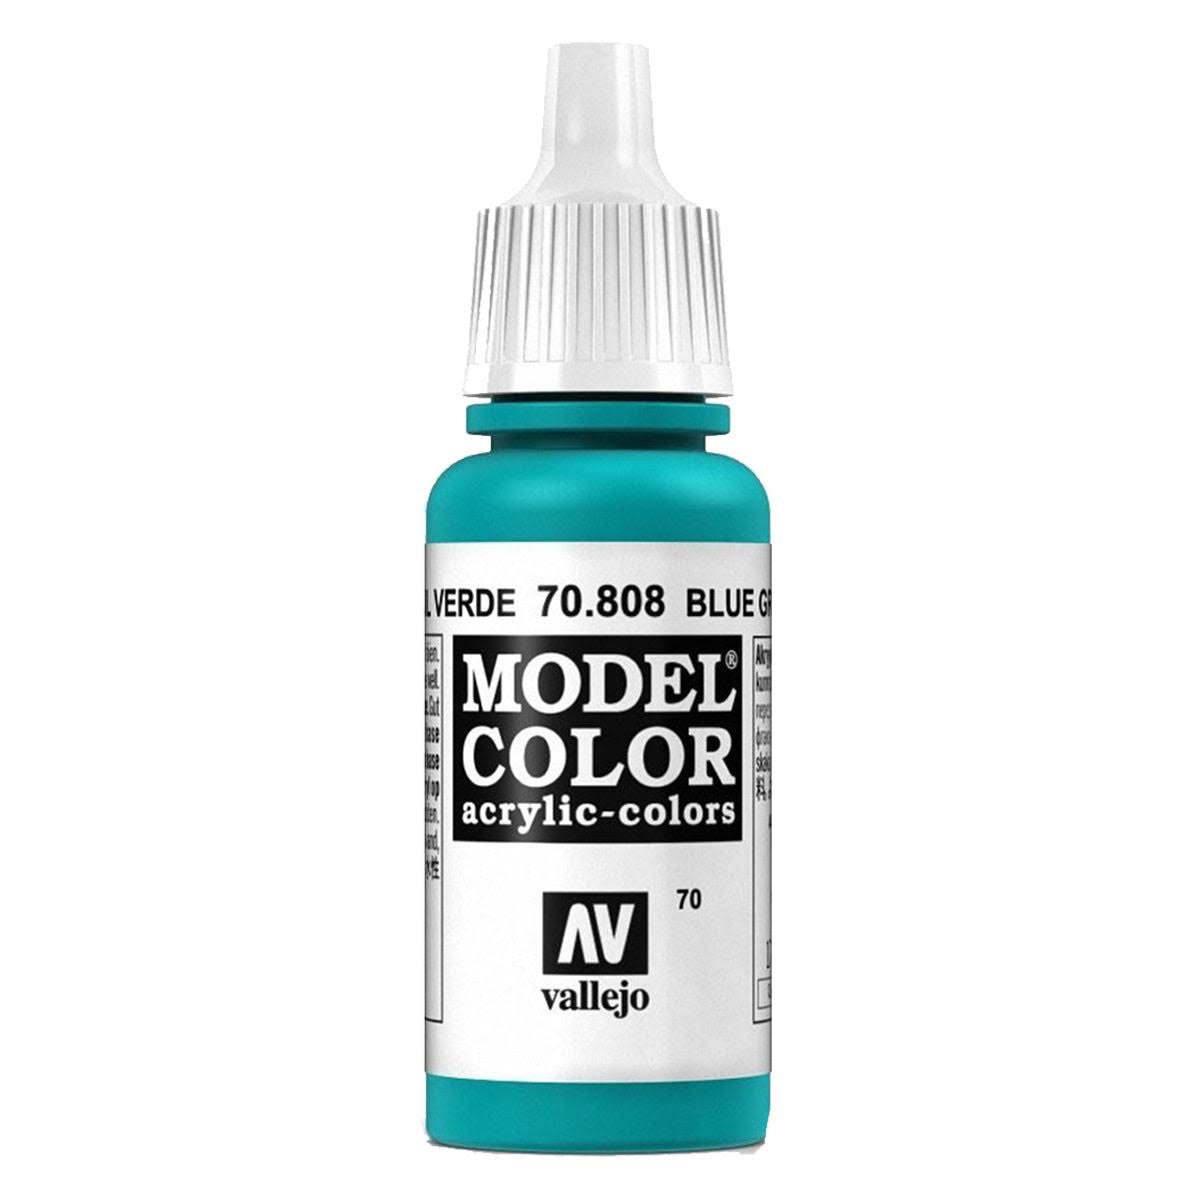 Vallejo Model Color Acrylic Paint - Blue Green, 17ml